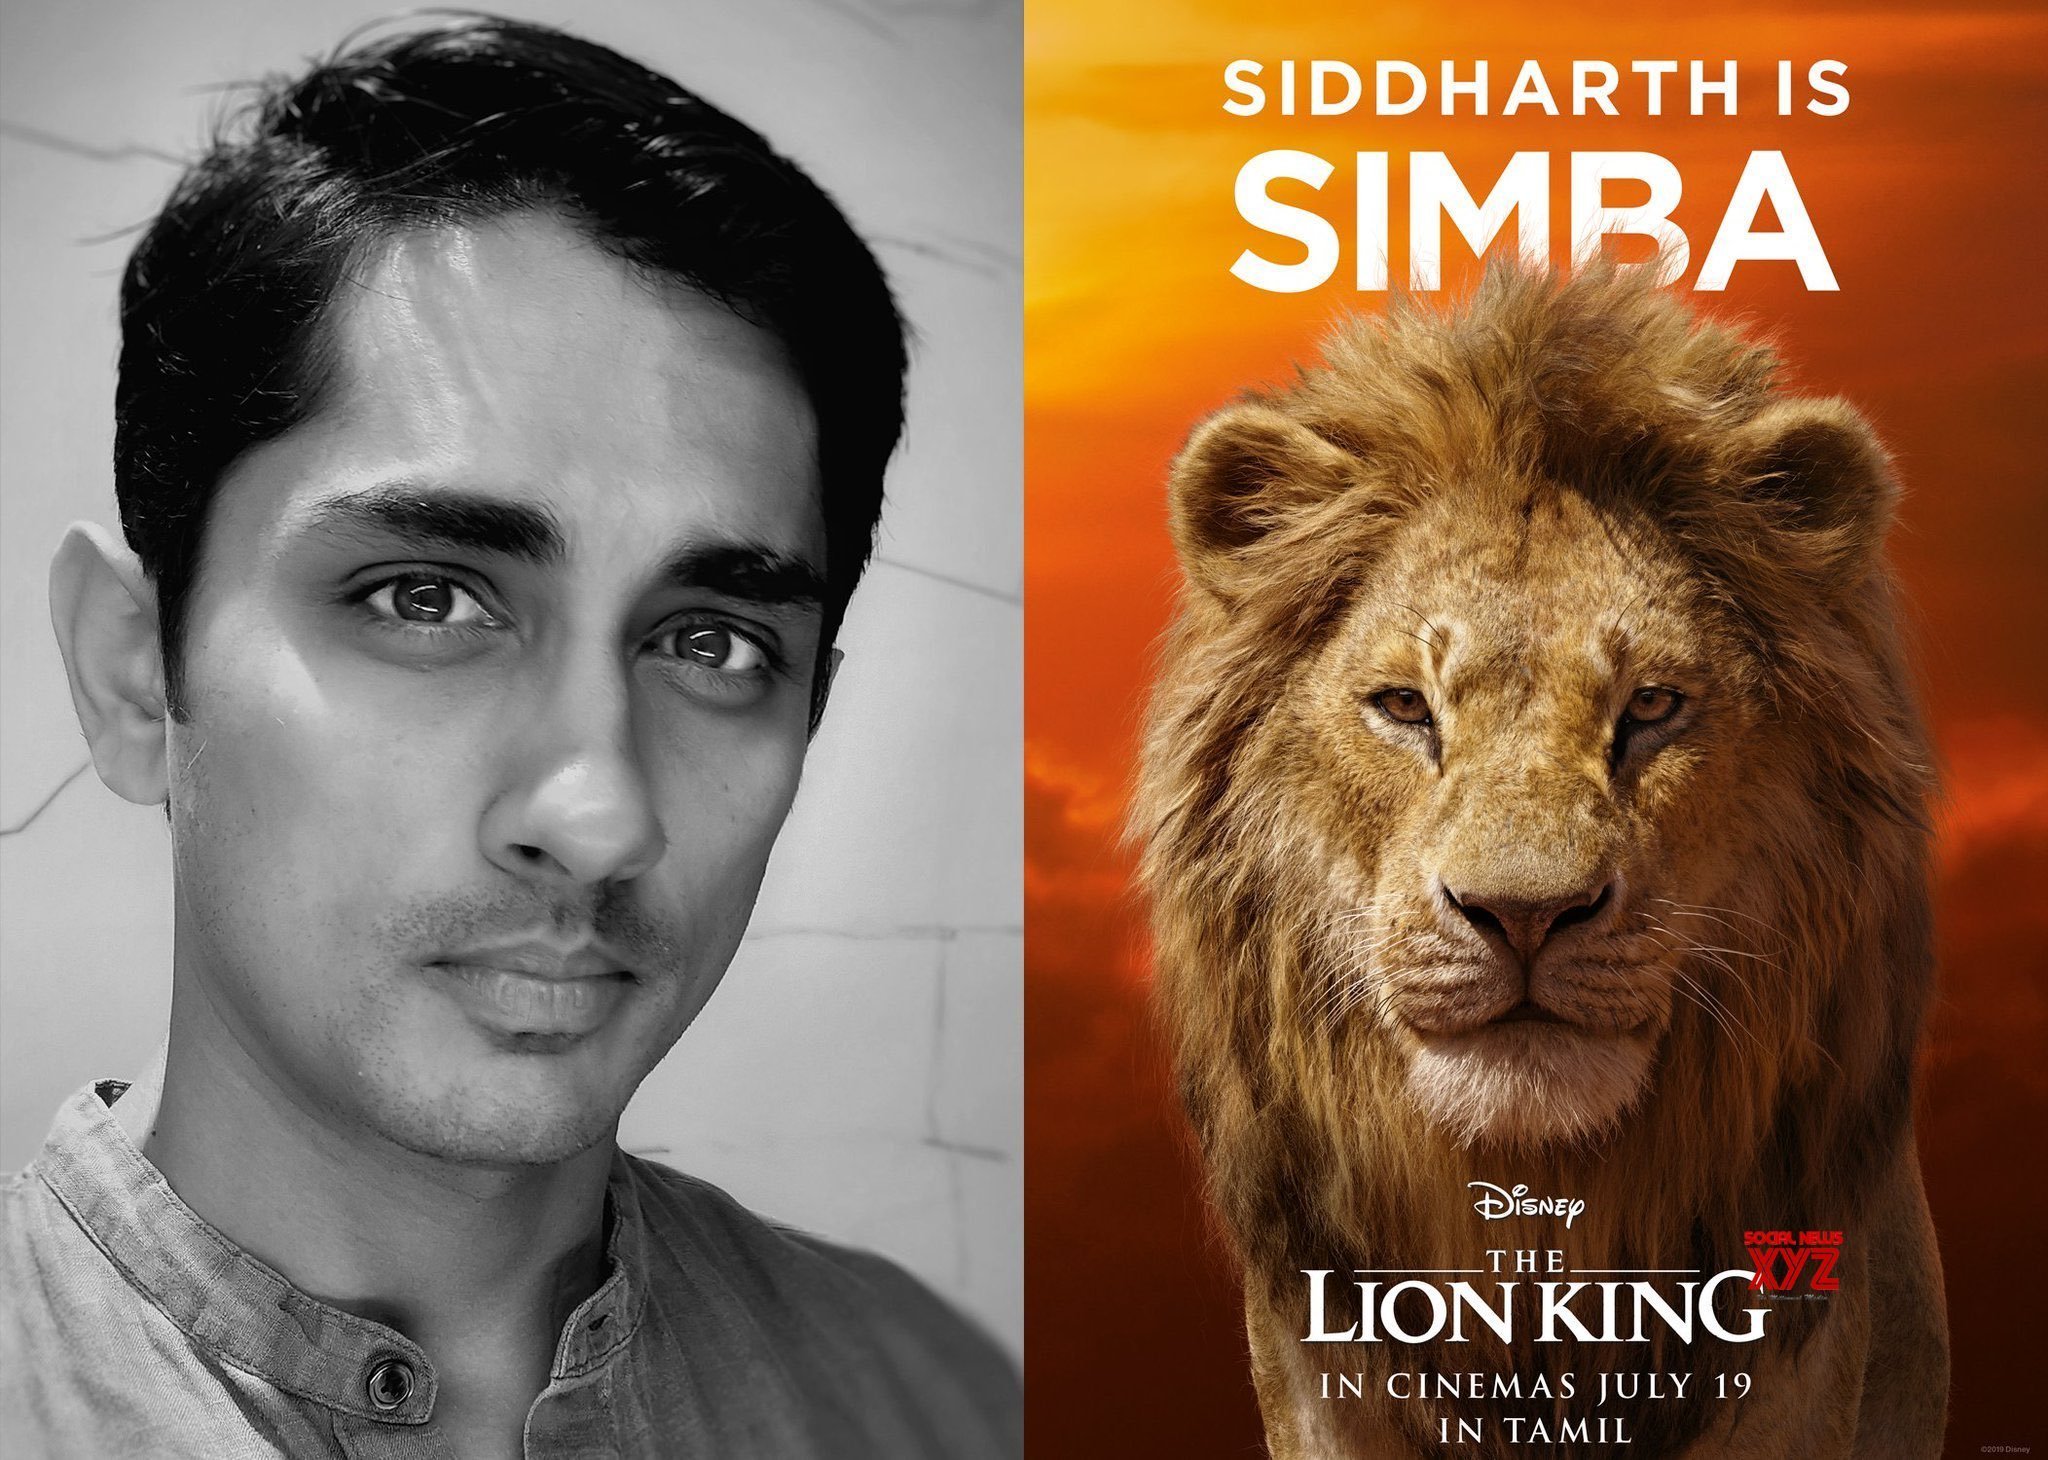 Siddharth to voice of Simba in Tamil